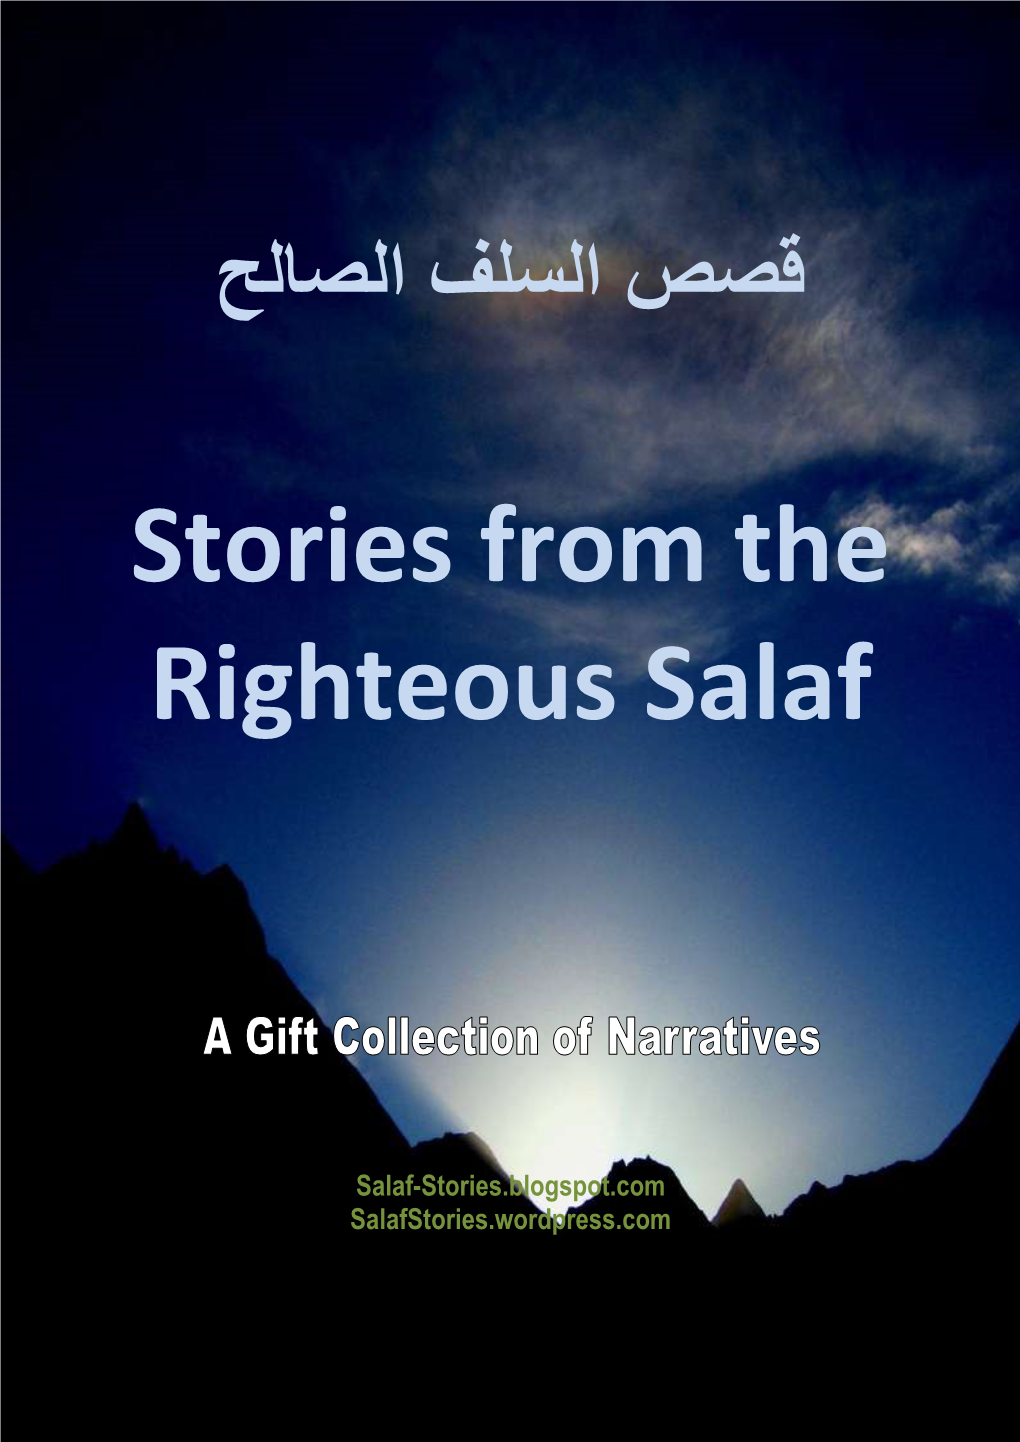 Stories from the Righteous Salaf